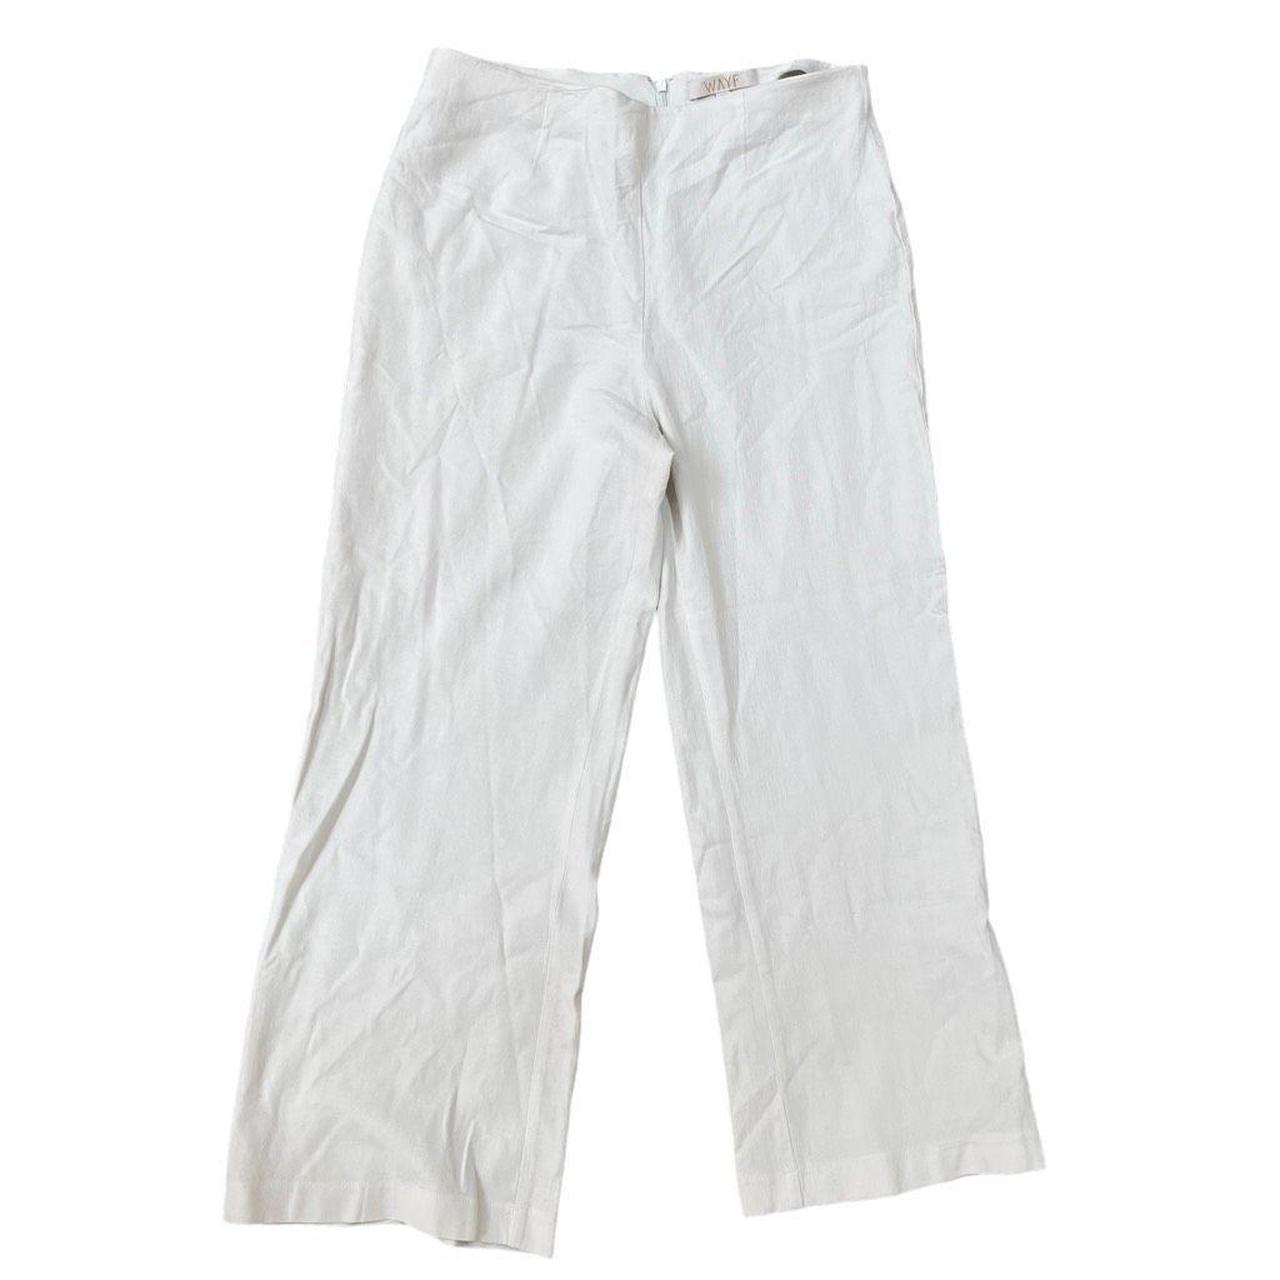 White Linen Blend Cropped Trousers | Women | George at ASDA